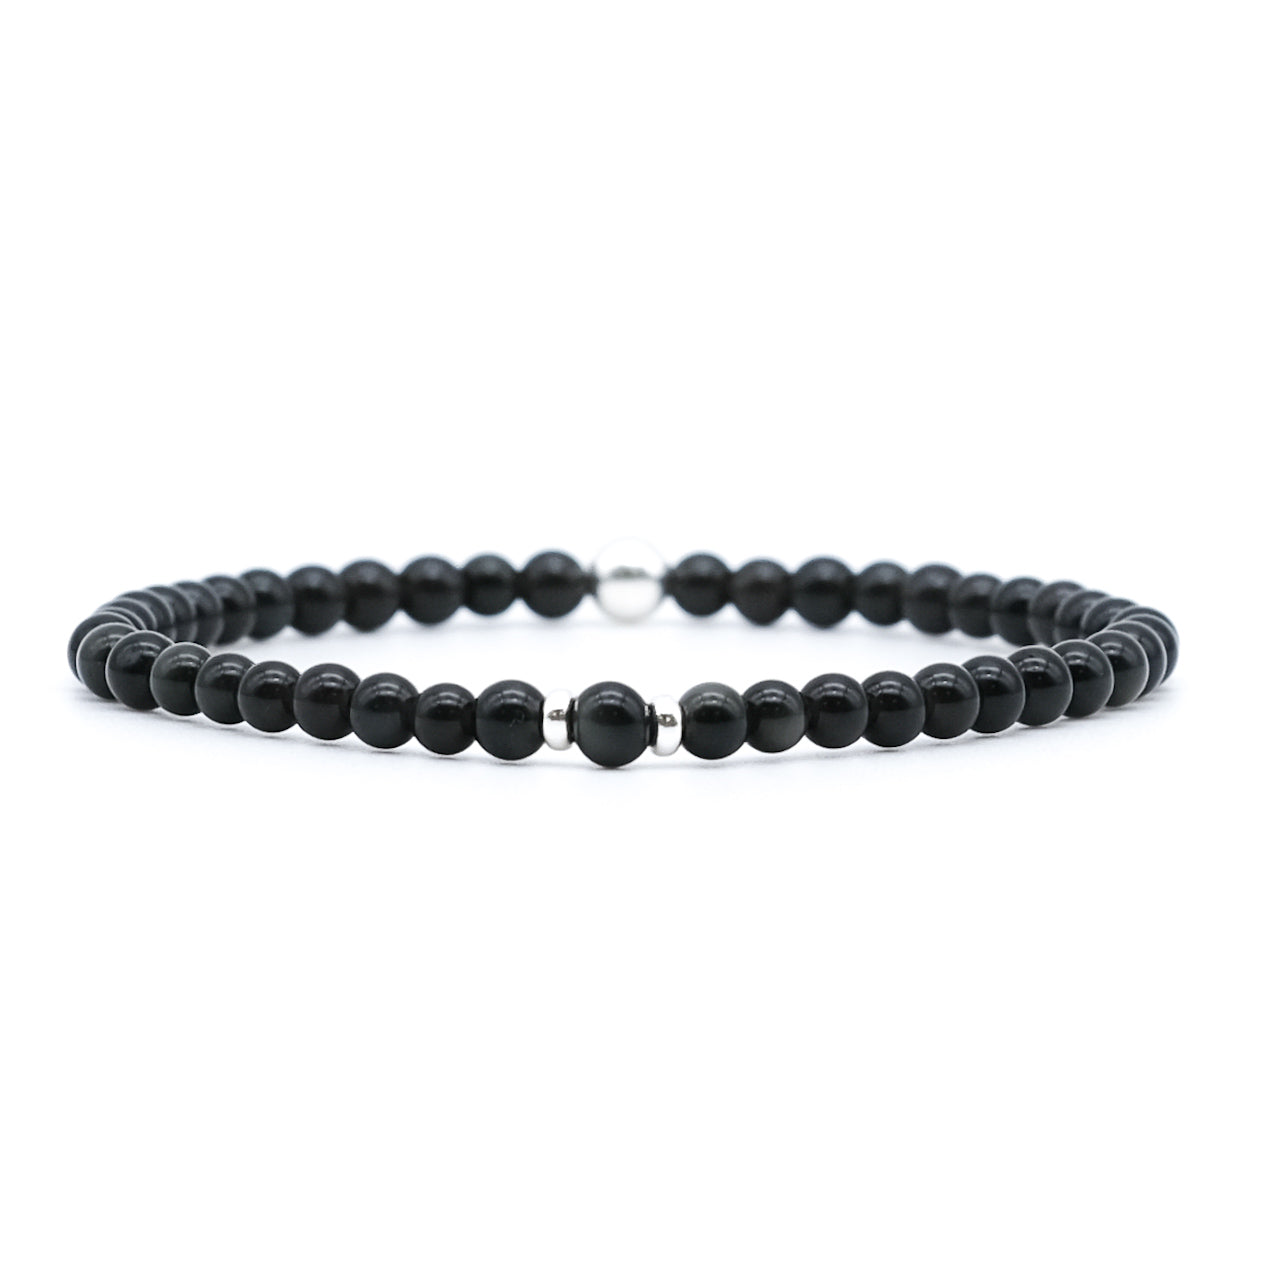 A Black obsidian gemstone bracelet in 4mm beads with silver accessories